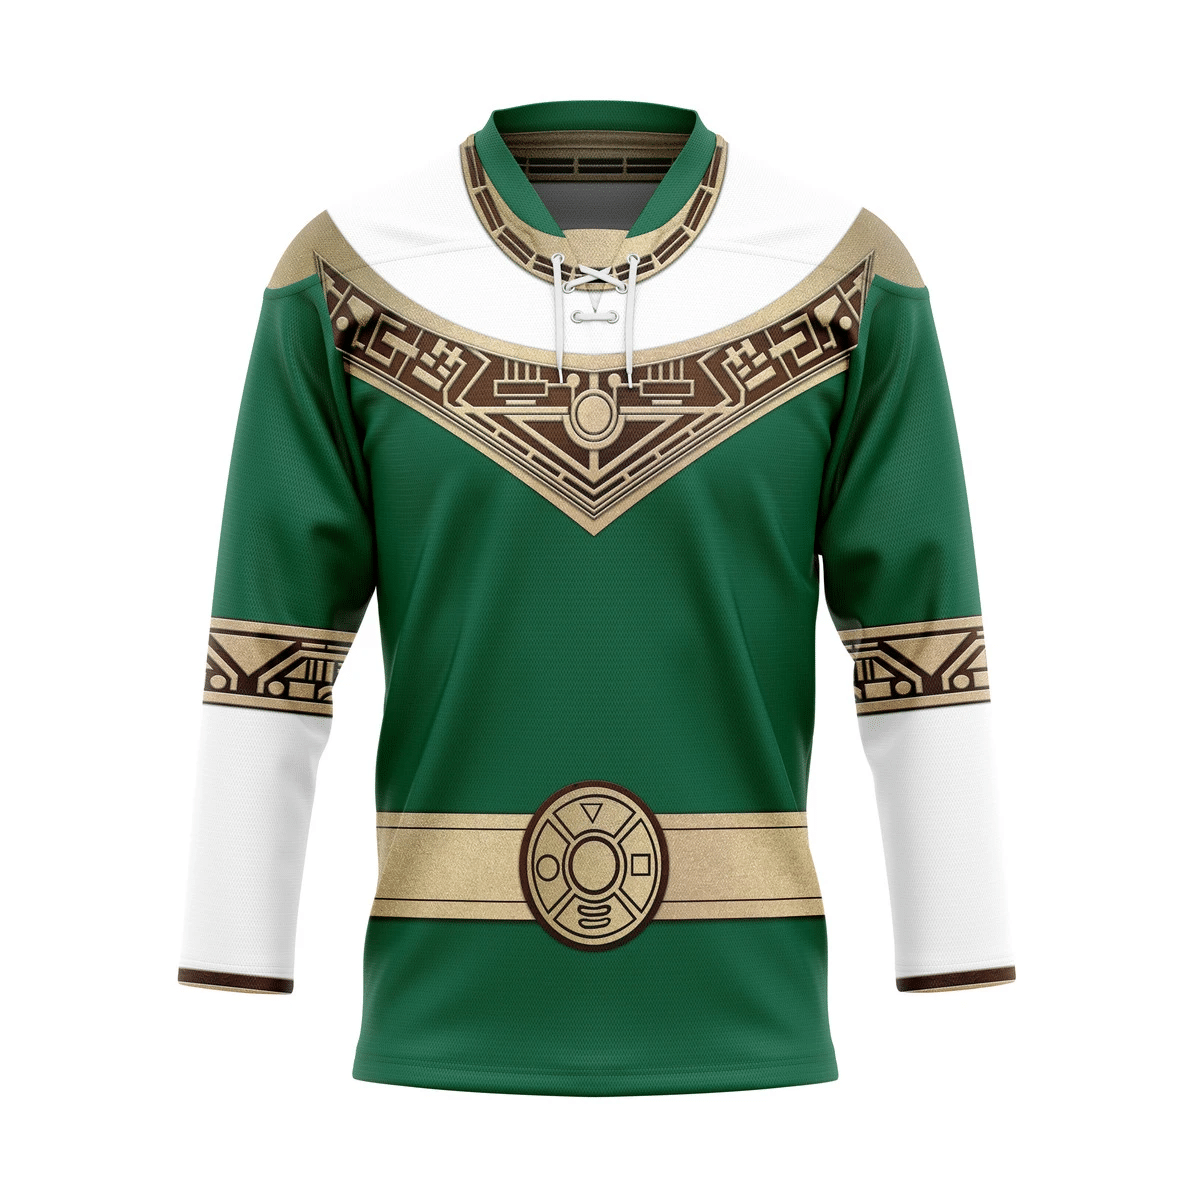 Top hot hockey jersey for NHL fans You can find out more at the bottom of the page! 65